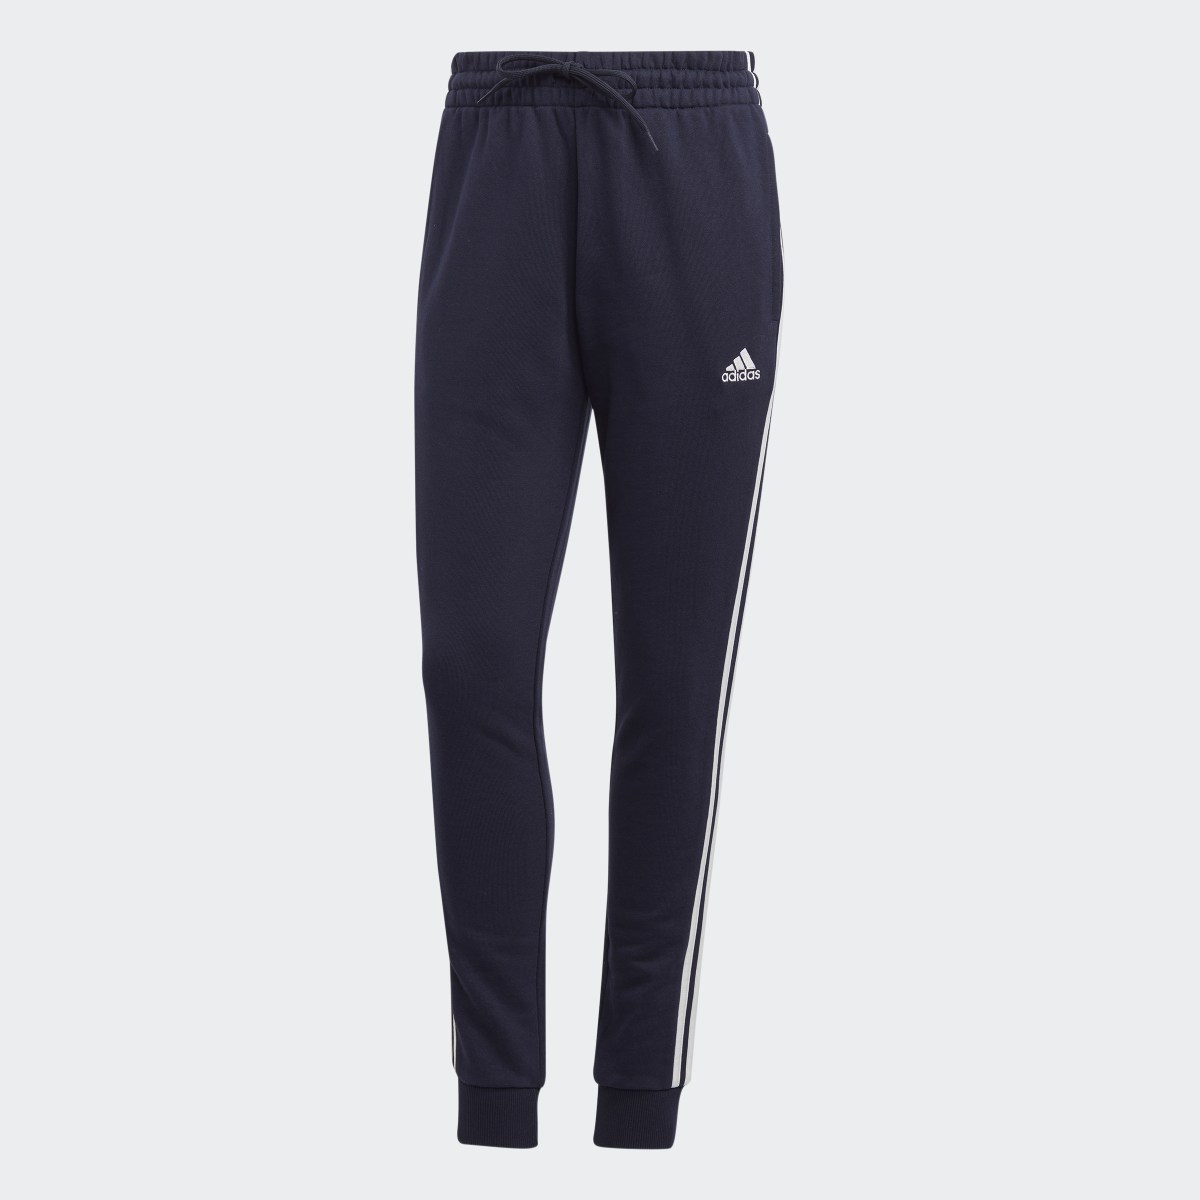 Adidas Essentials 3-Stripes French Terry Cuffed Joggers. 4